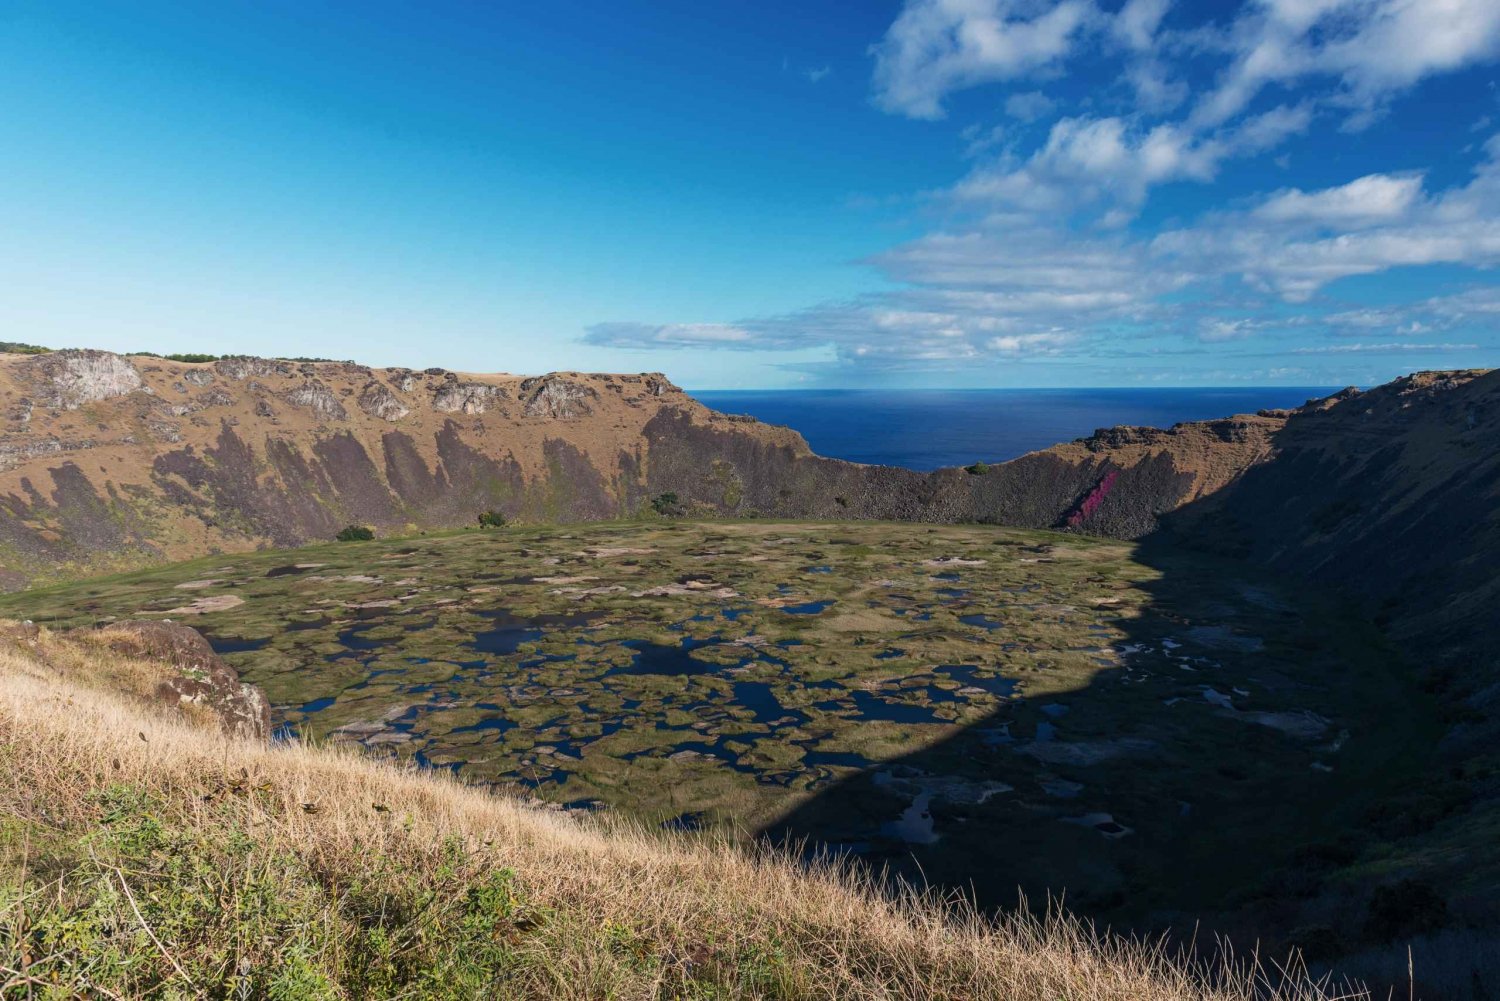 Rapa Nui Highlights Program: 3 incredible tours to discover!